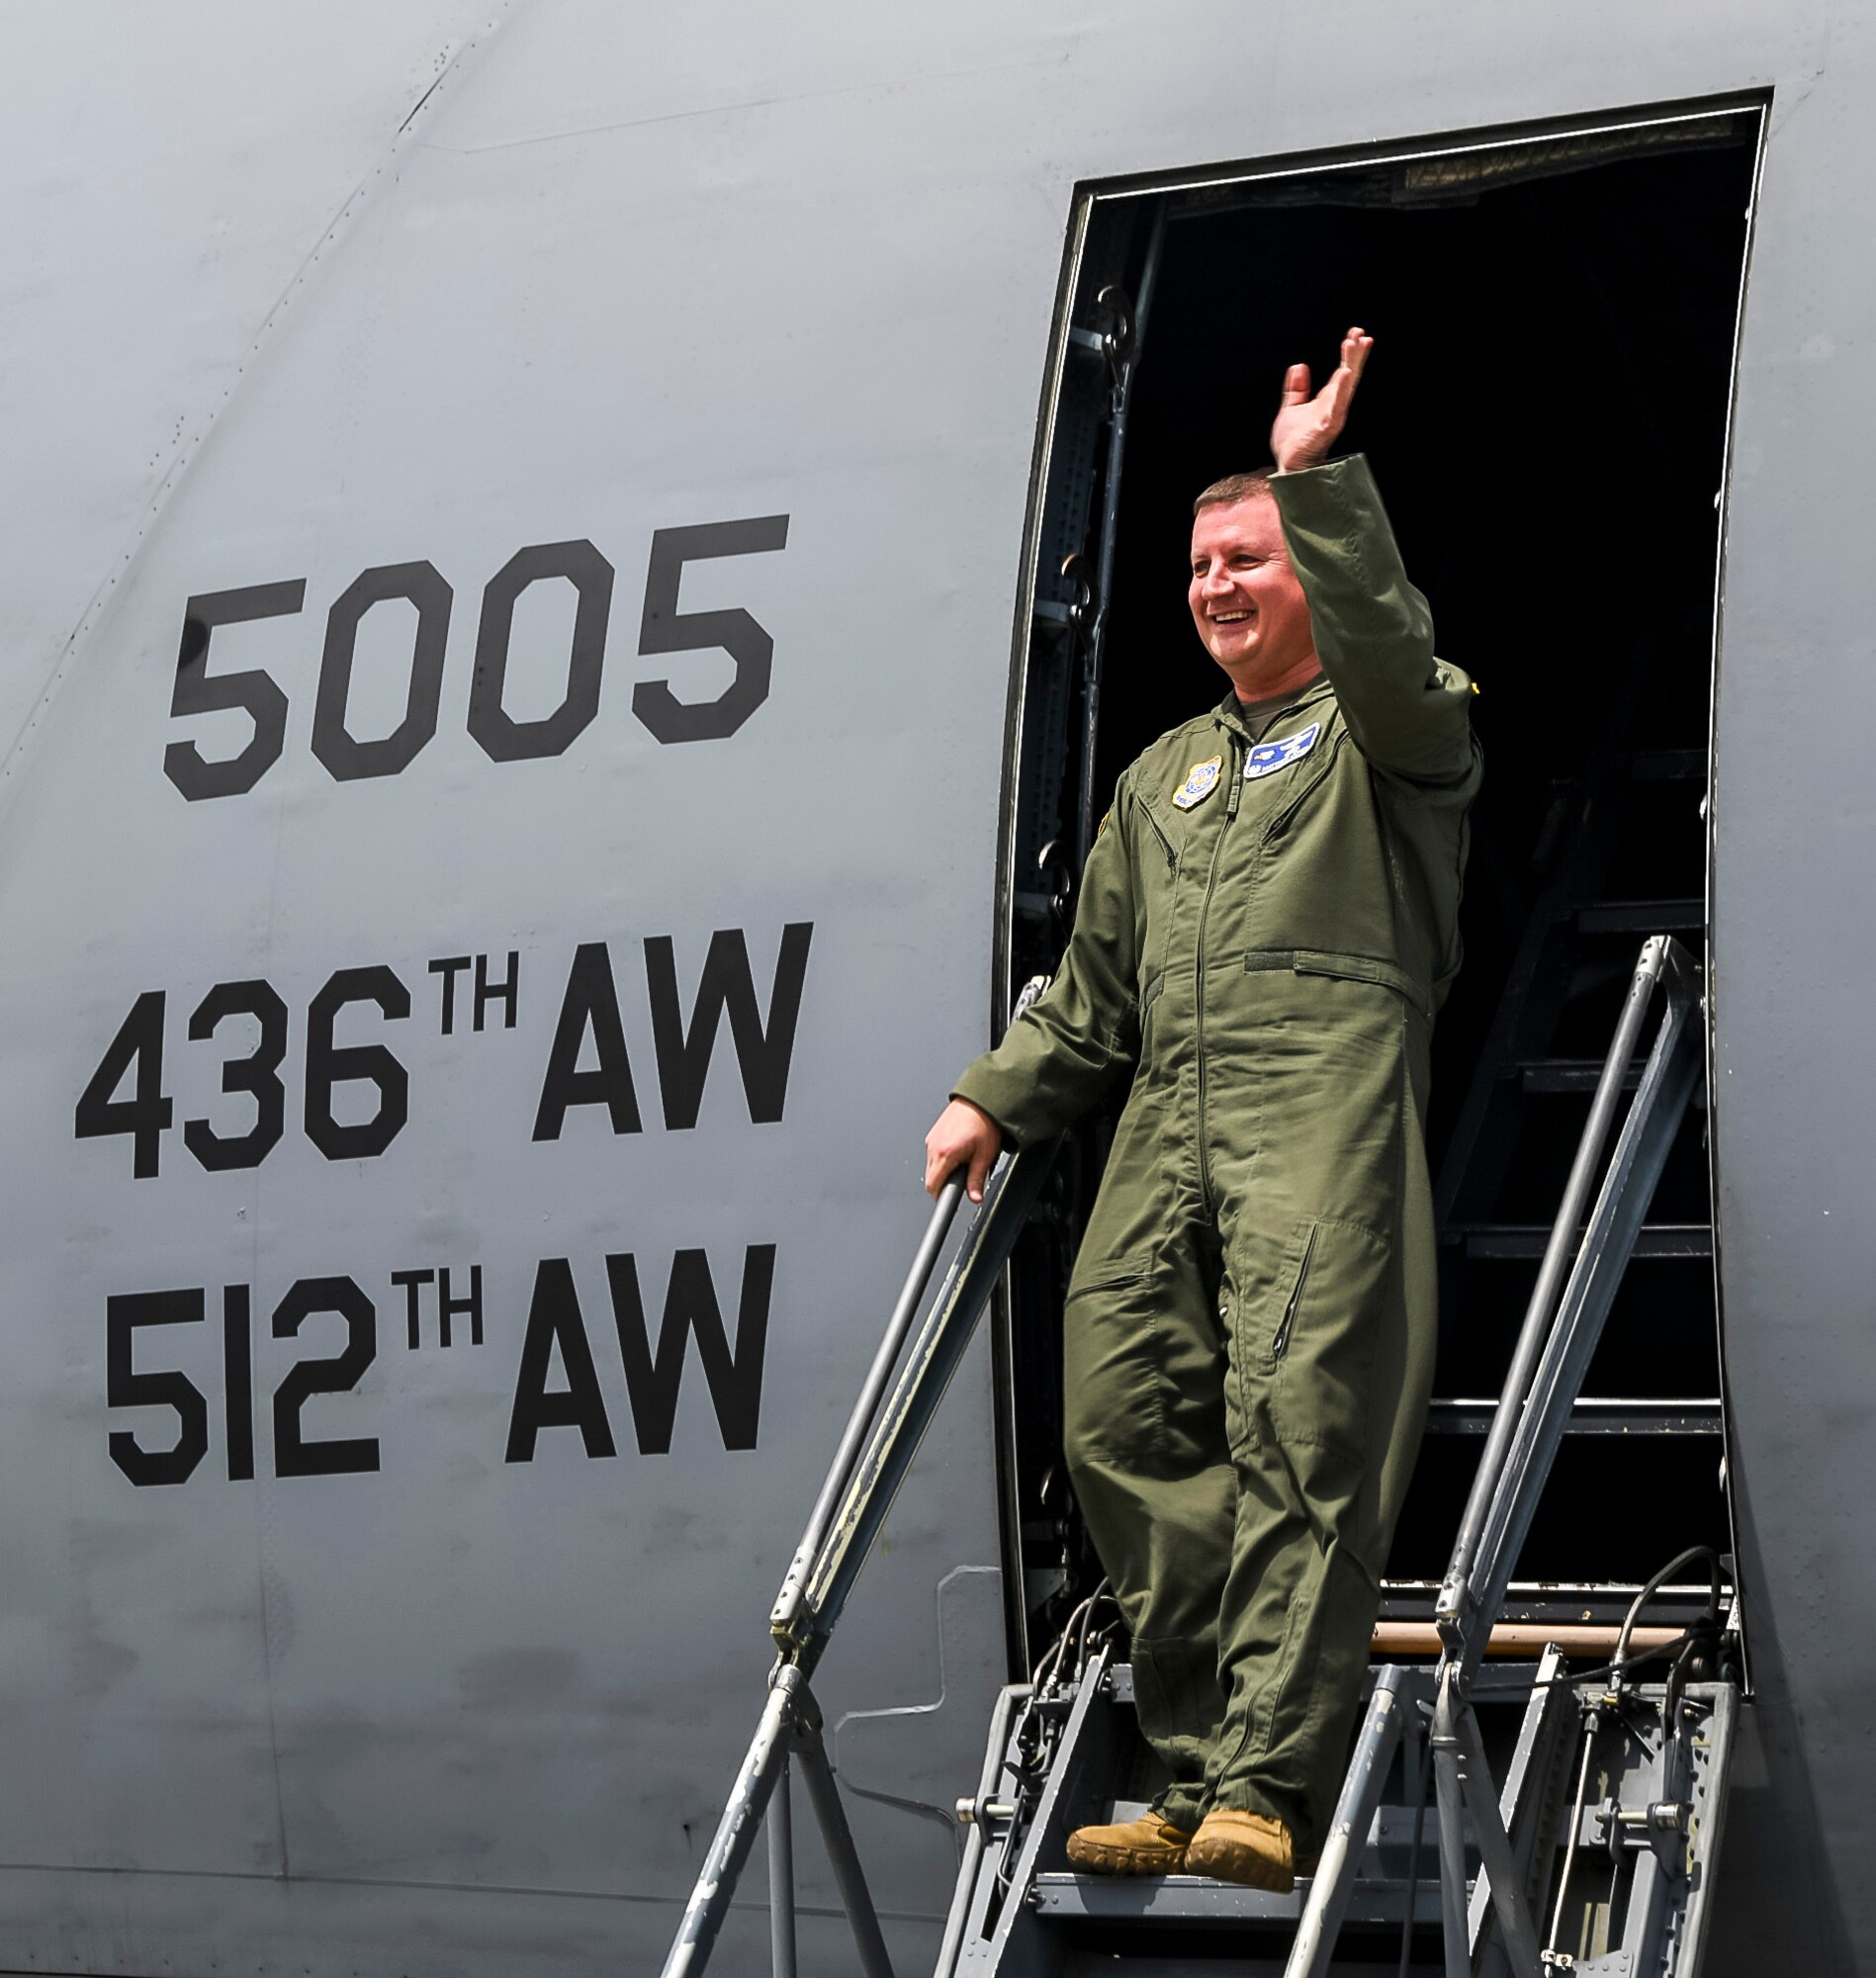 Col. Matthew Jones, 436th Airlift Wing commander, waves to family and colleagues following his fini flight in a C-5M Super Galaxy at Dover Air Force Base, Delaware, May 4, 2021. A “fini flight” is an Air Force tradition where an Airman and their family celebrate their final flight. (U.S. Air Force photo by Airman 1st Class Stephani Barge)